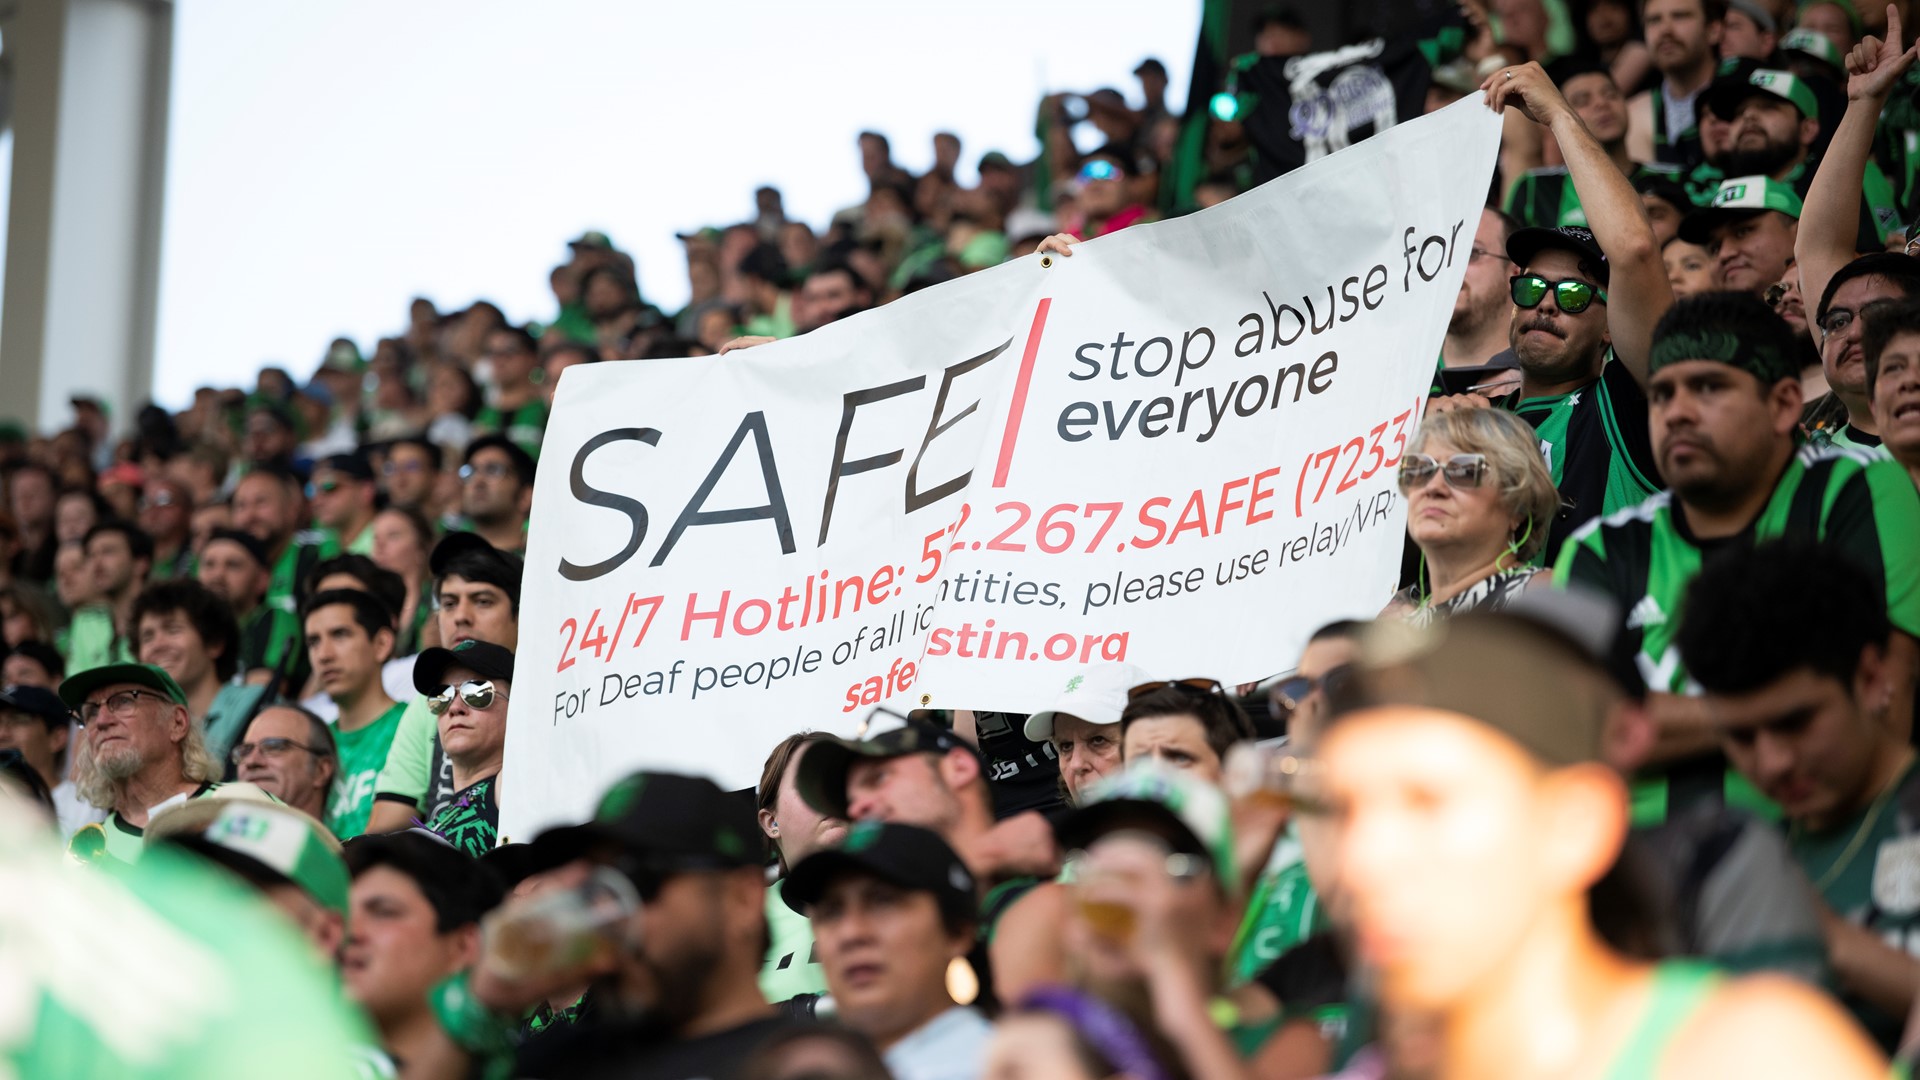 At the 10-minute mark, Austin FC fans went silent in support of domestic abuse victims and survivors.